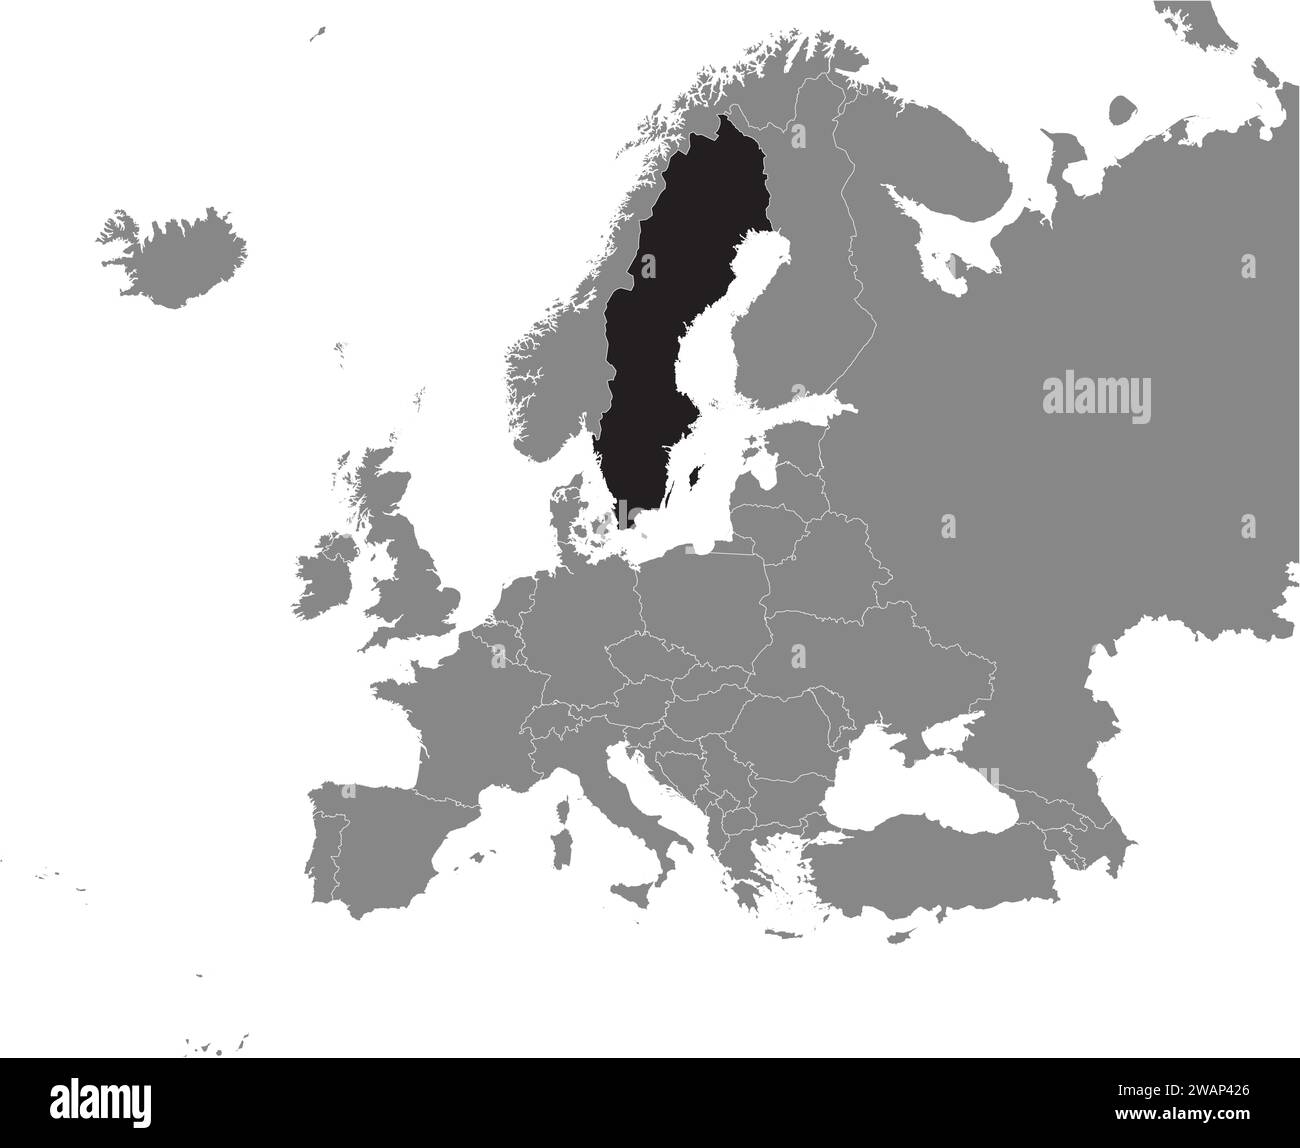 Location map of the KINGDOM OF SWEDEN, EUROPE Stock Vector